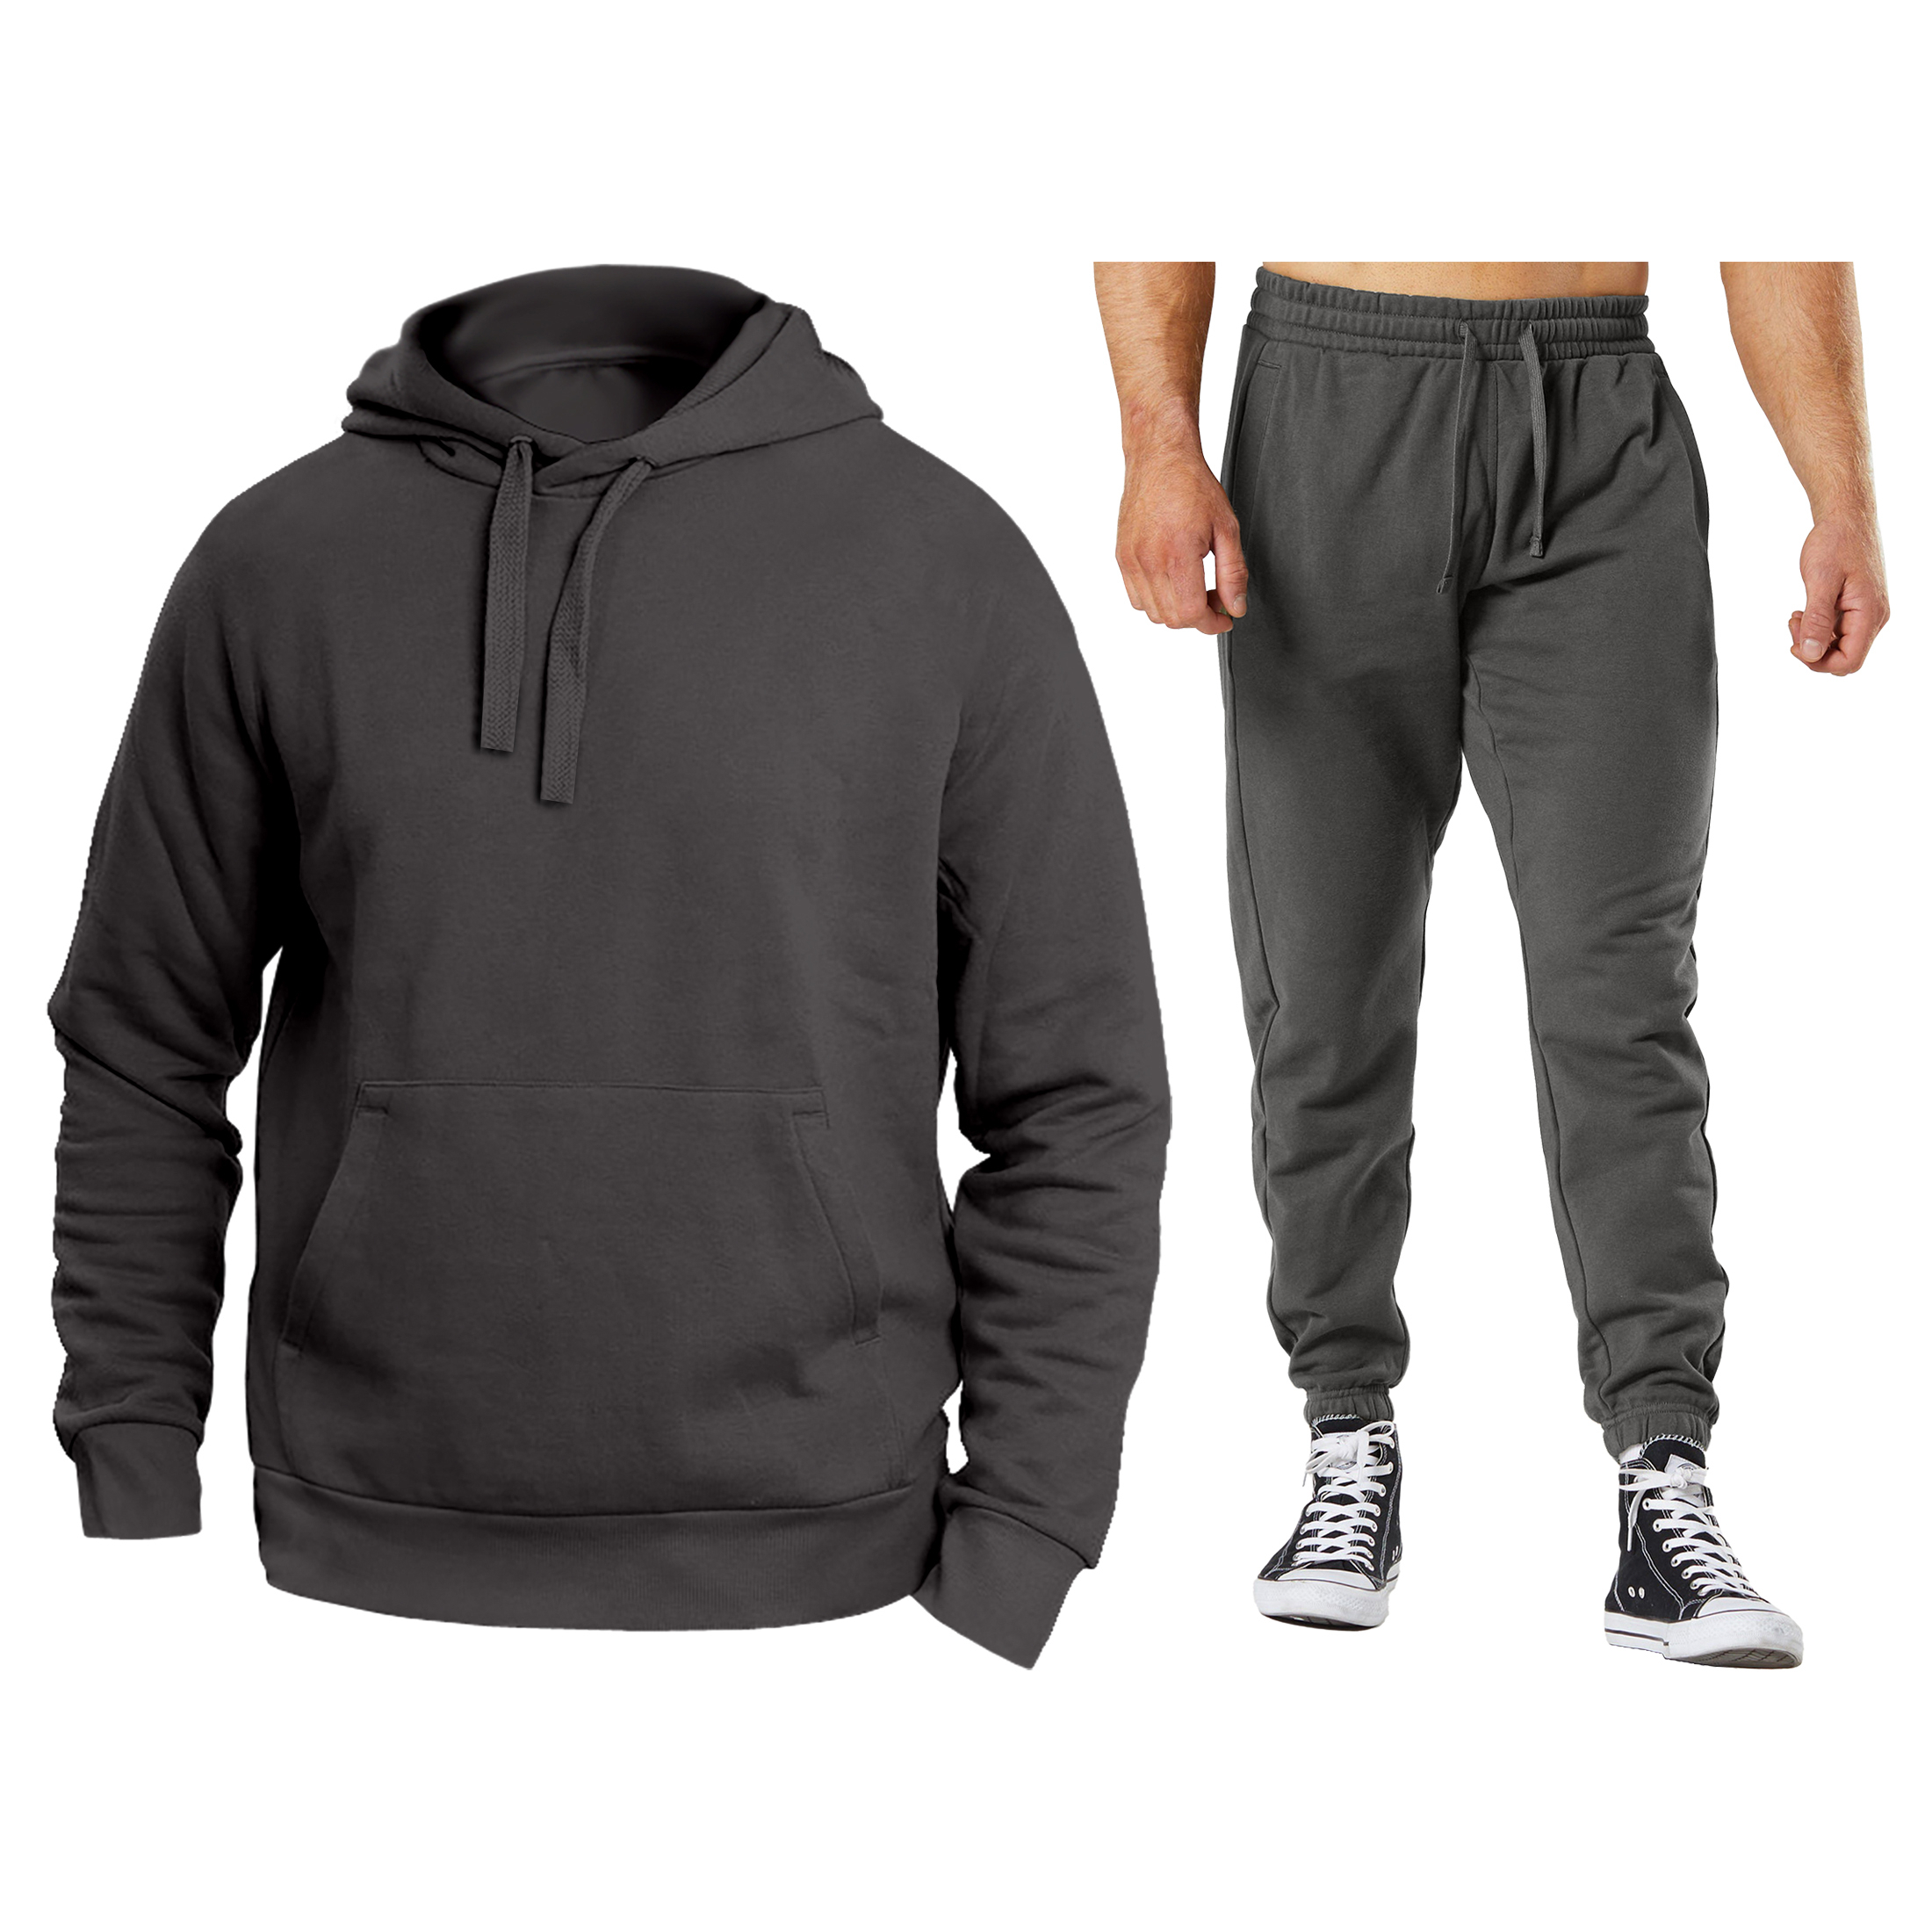 Men's Athletic Warm Jogging Pullover Active Sweatsuit - Charcoal, Small